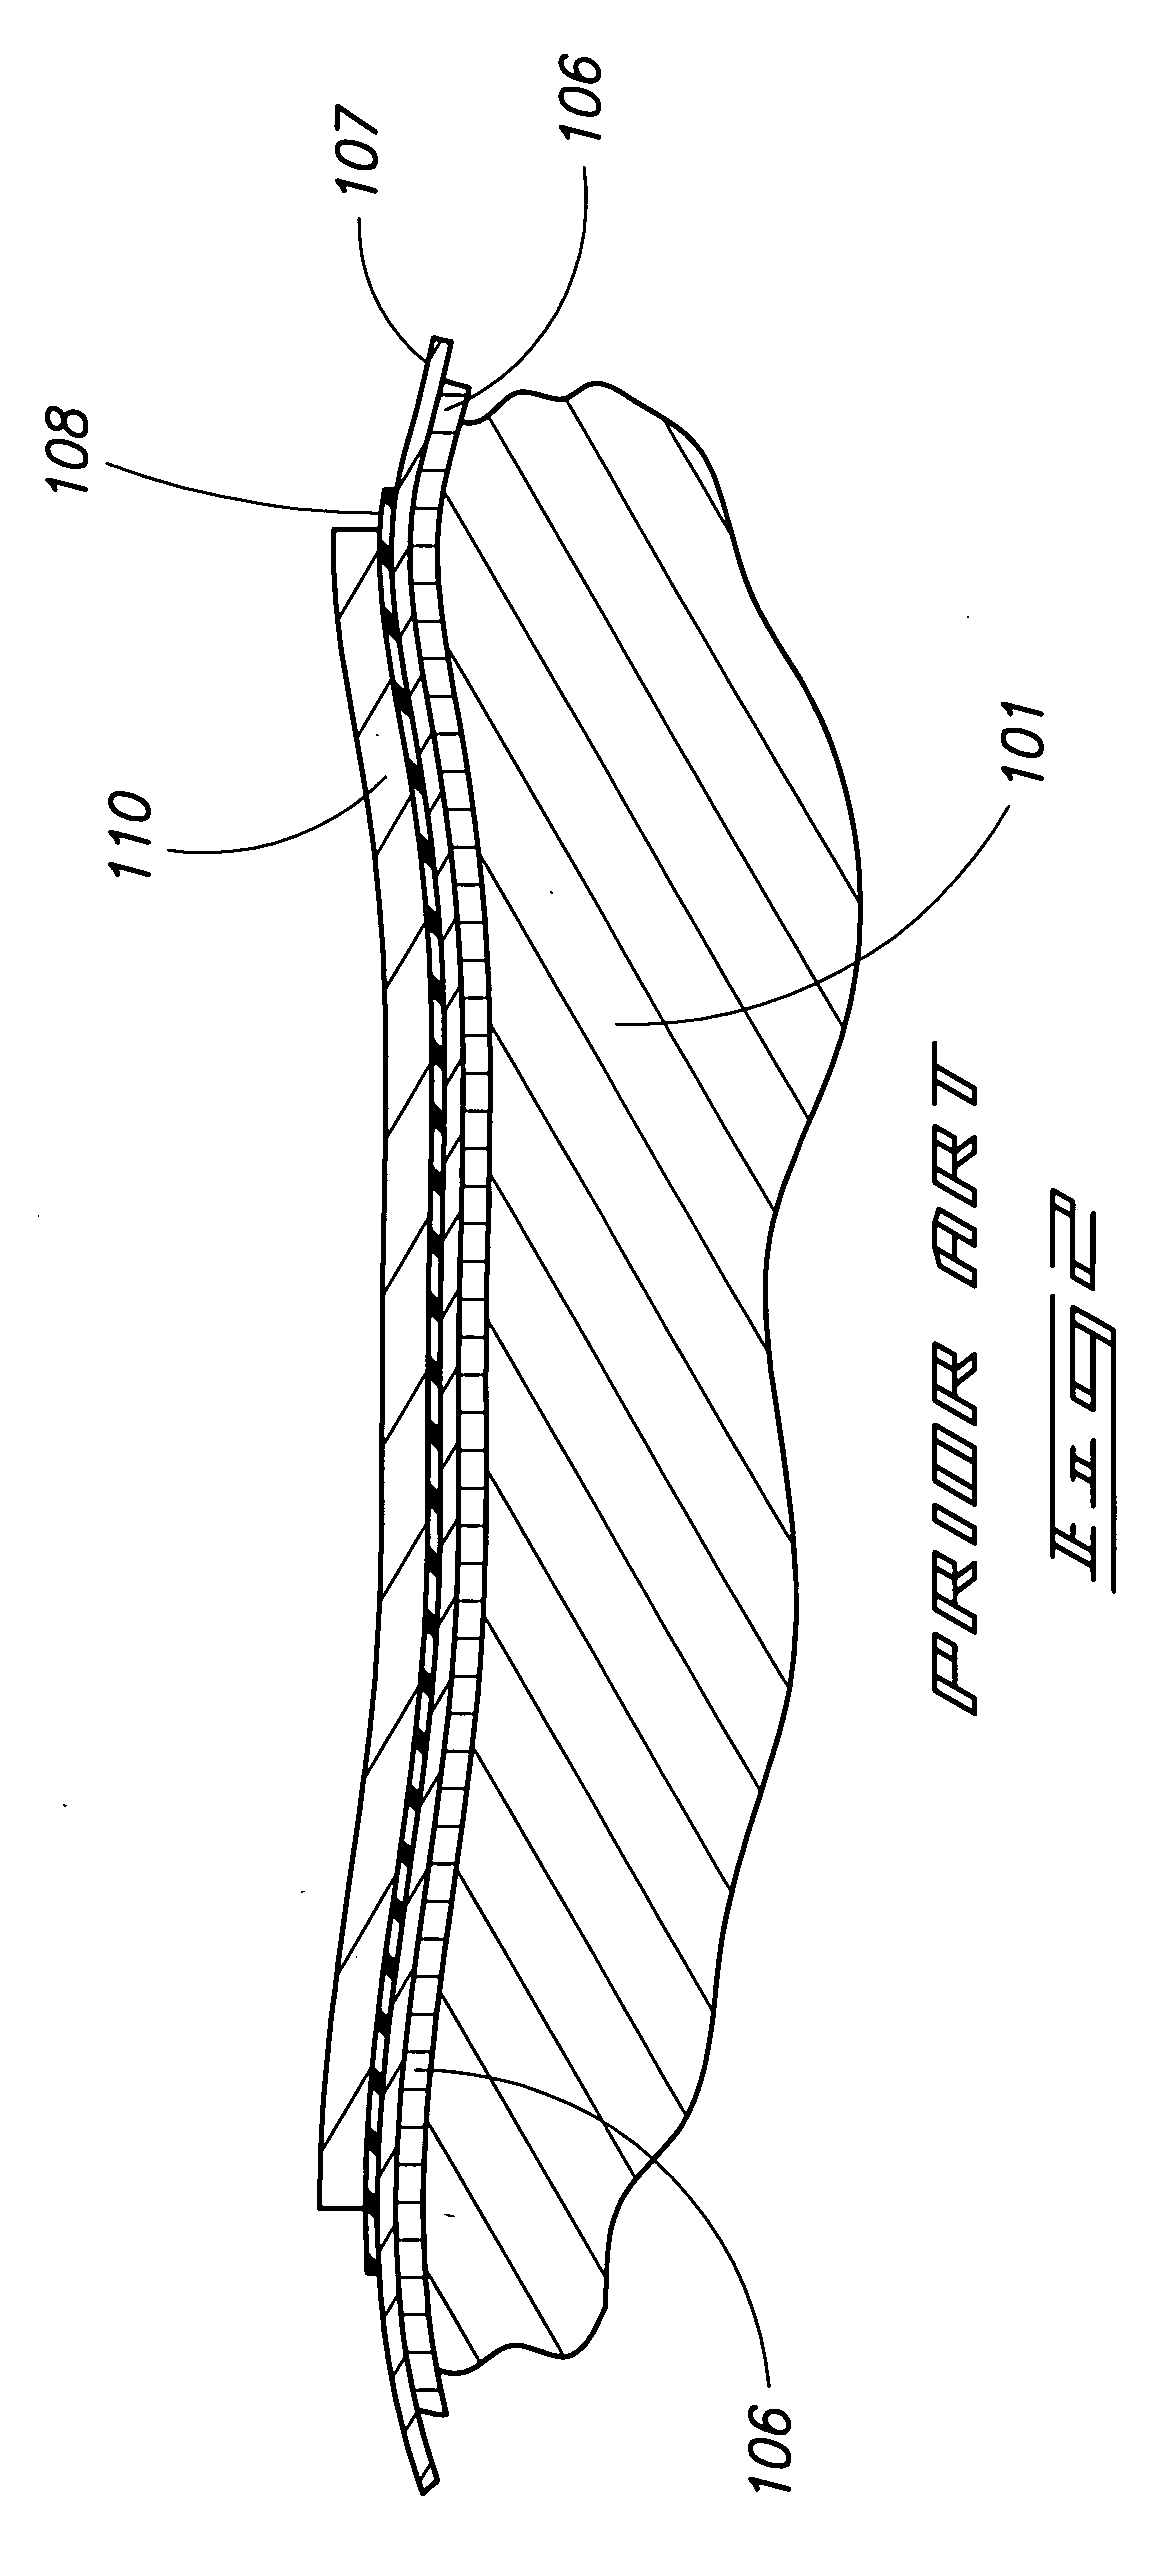 Force distributing interface system